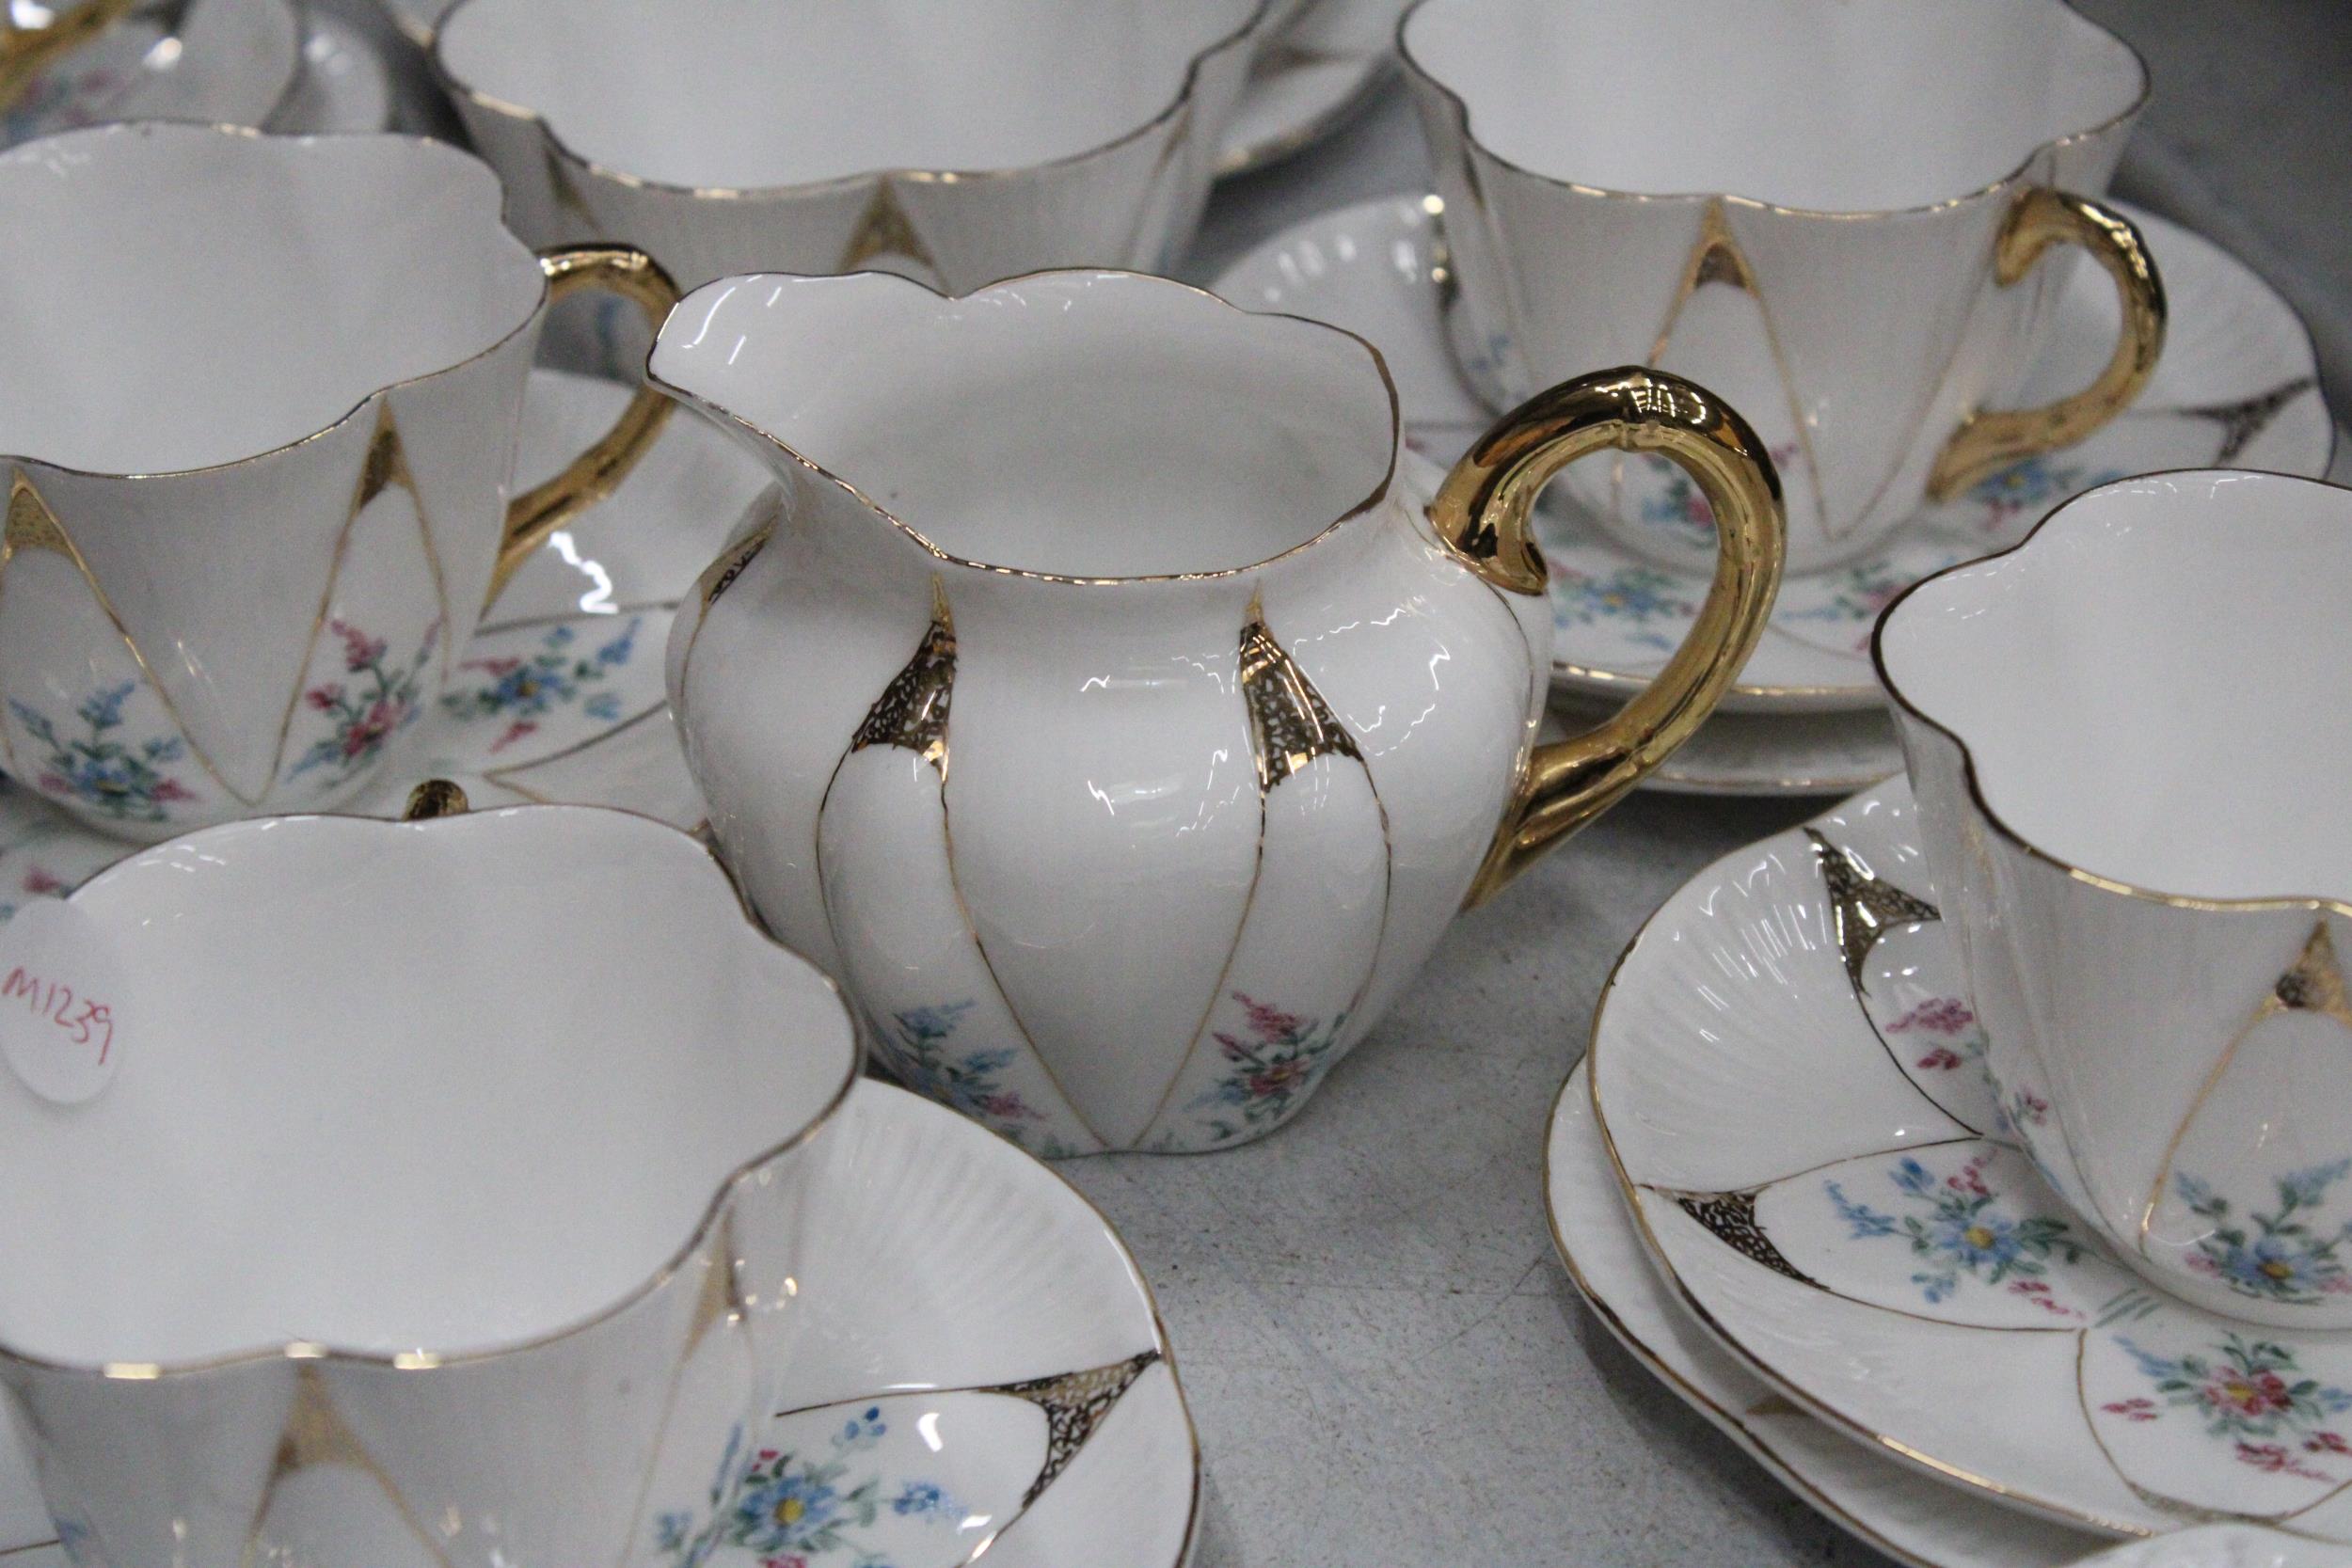 A VINTAGE SHELLEY HANDPAINTED DAINTY SHAPE TEACUPS AND SAUCERS TO INCLUDE SUGAR, CREAMER, CAKE/BREAD - Image 4 of 6